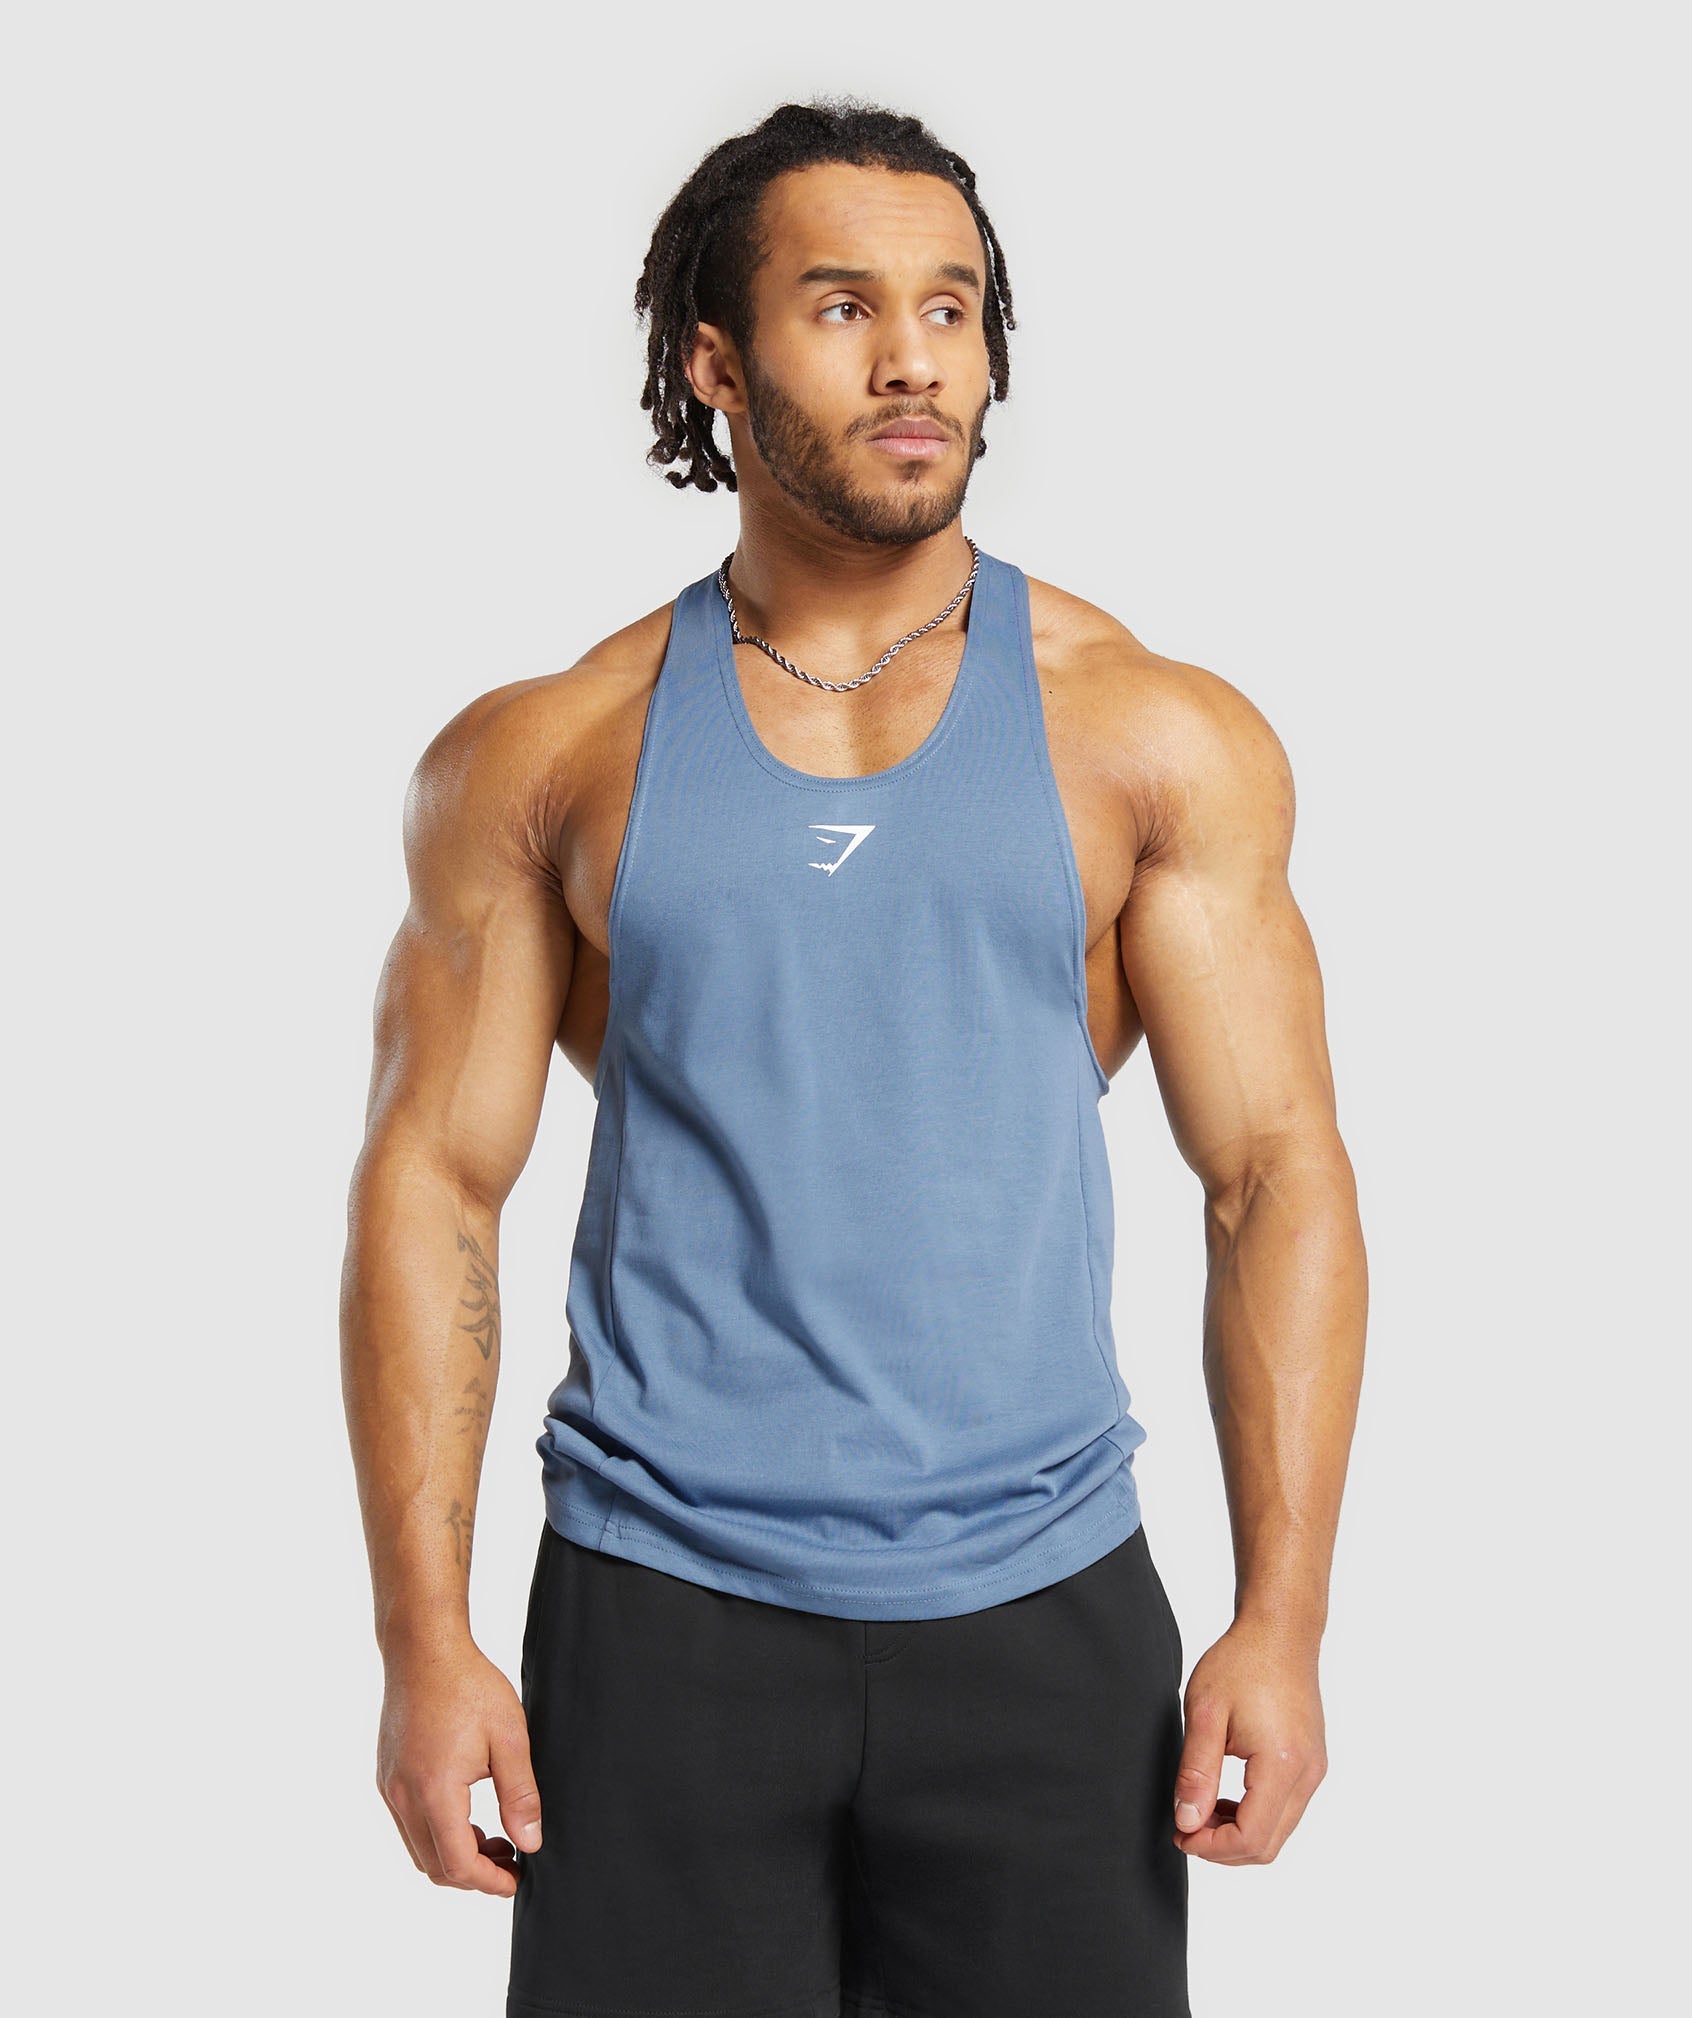 React Stringer in Faded Blue is out of stock